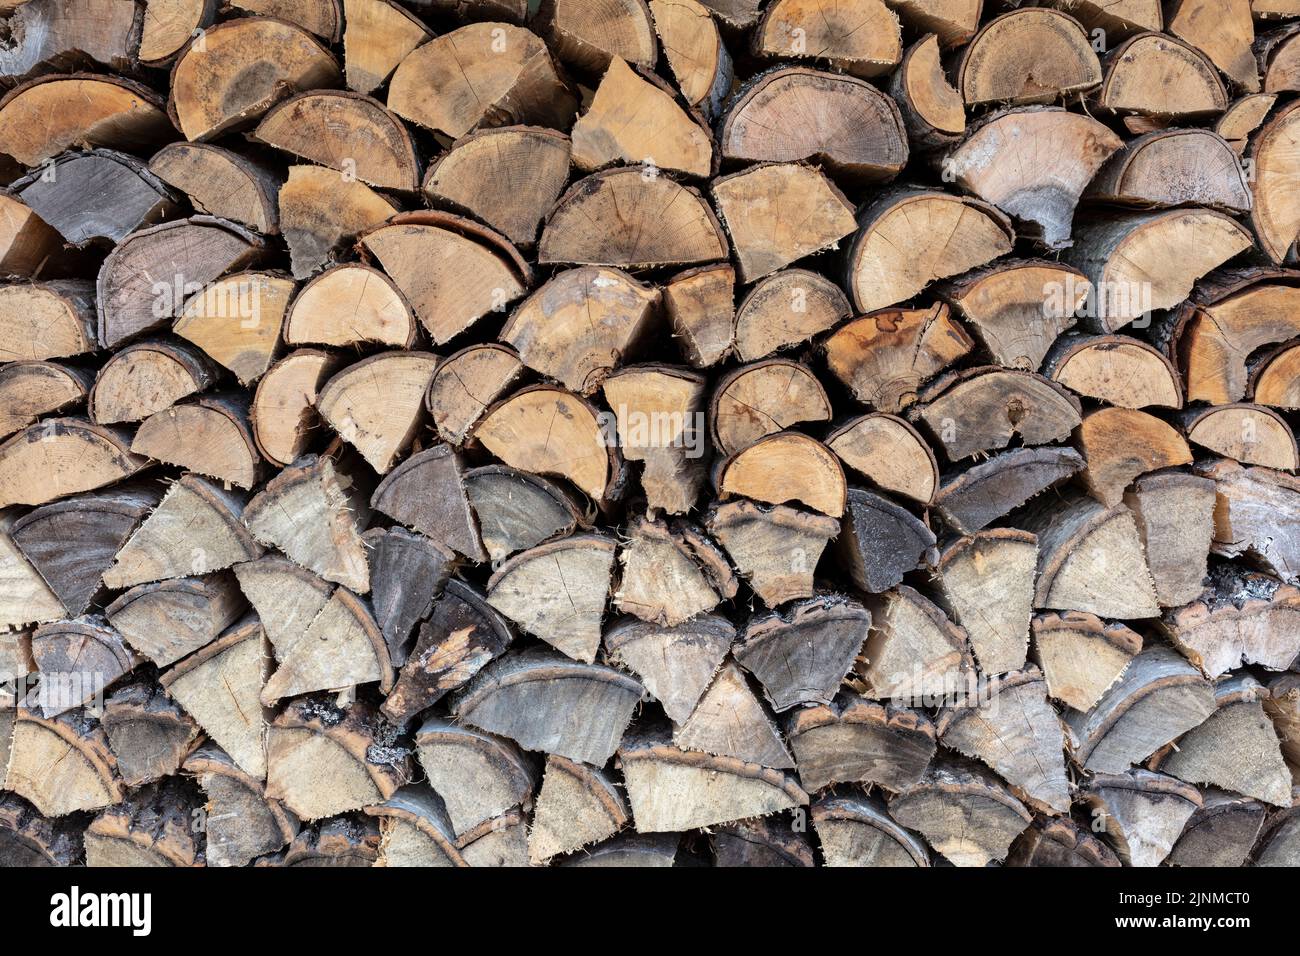 Small section of the firewood in my new woodshed. Stock Photo